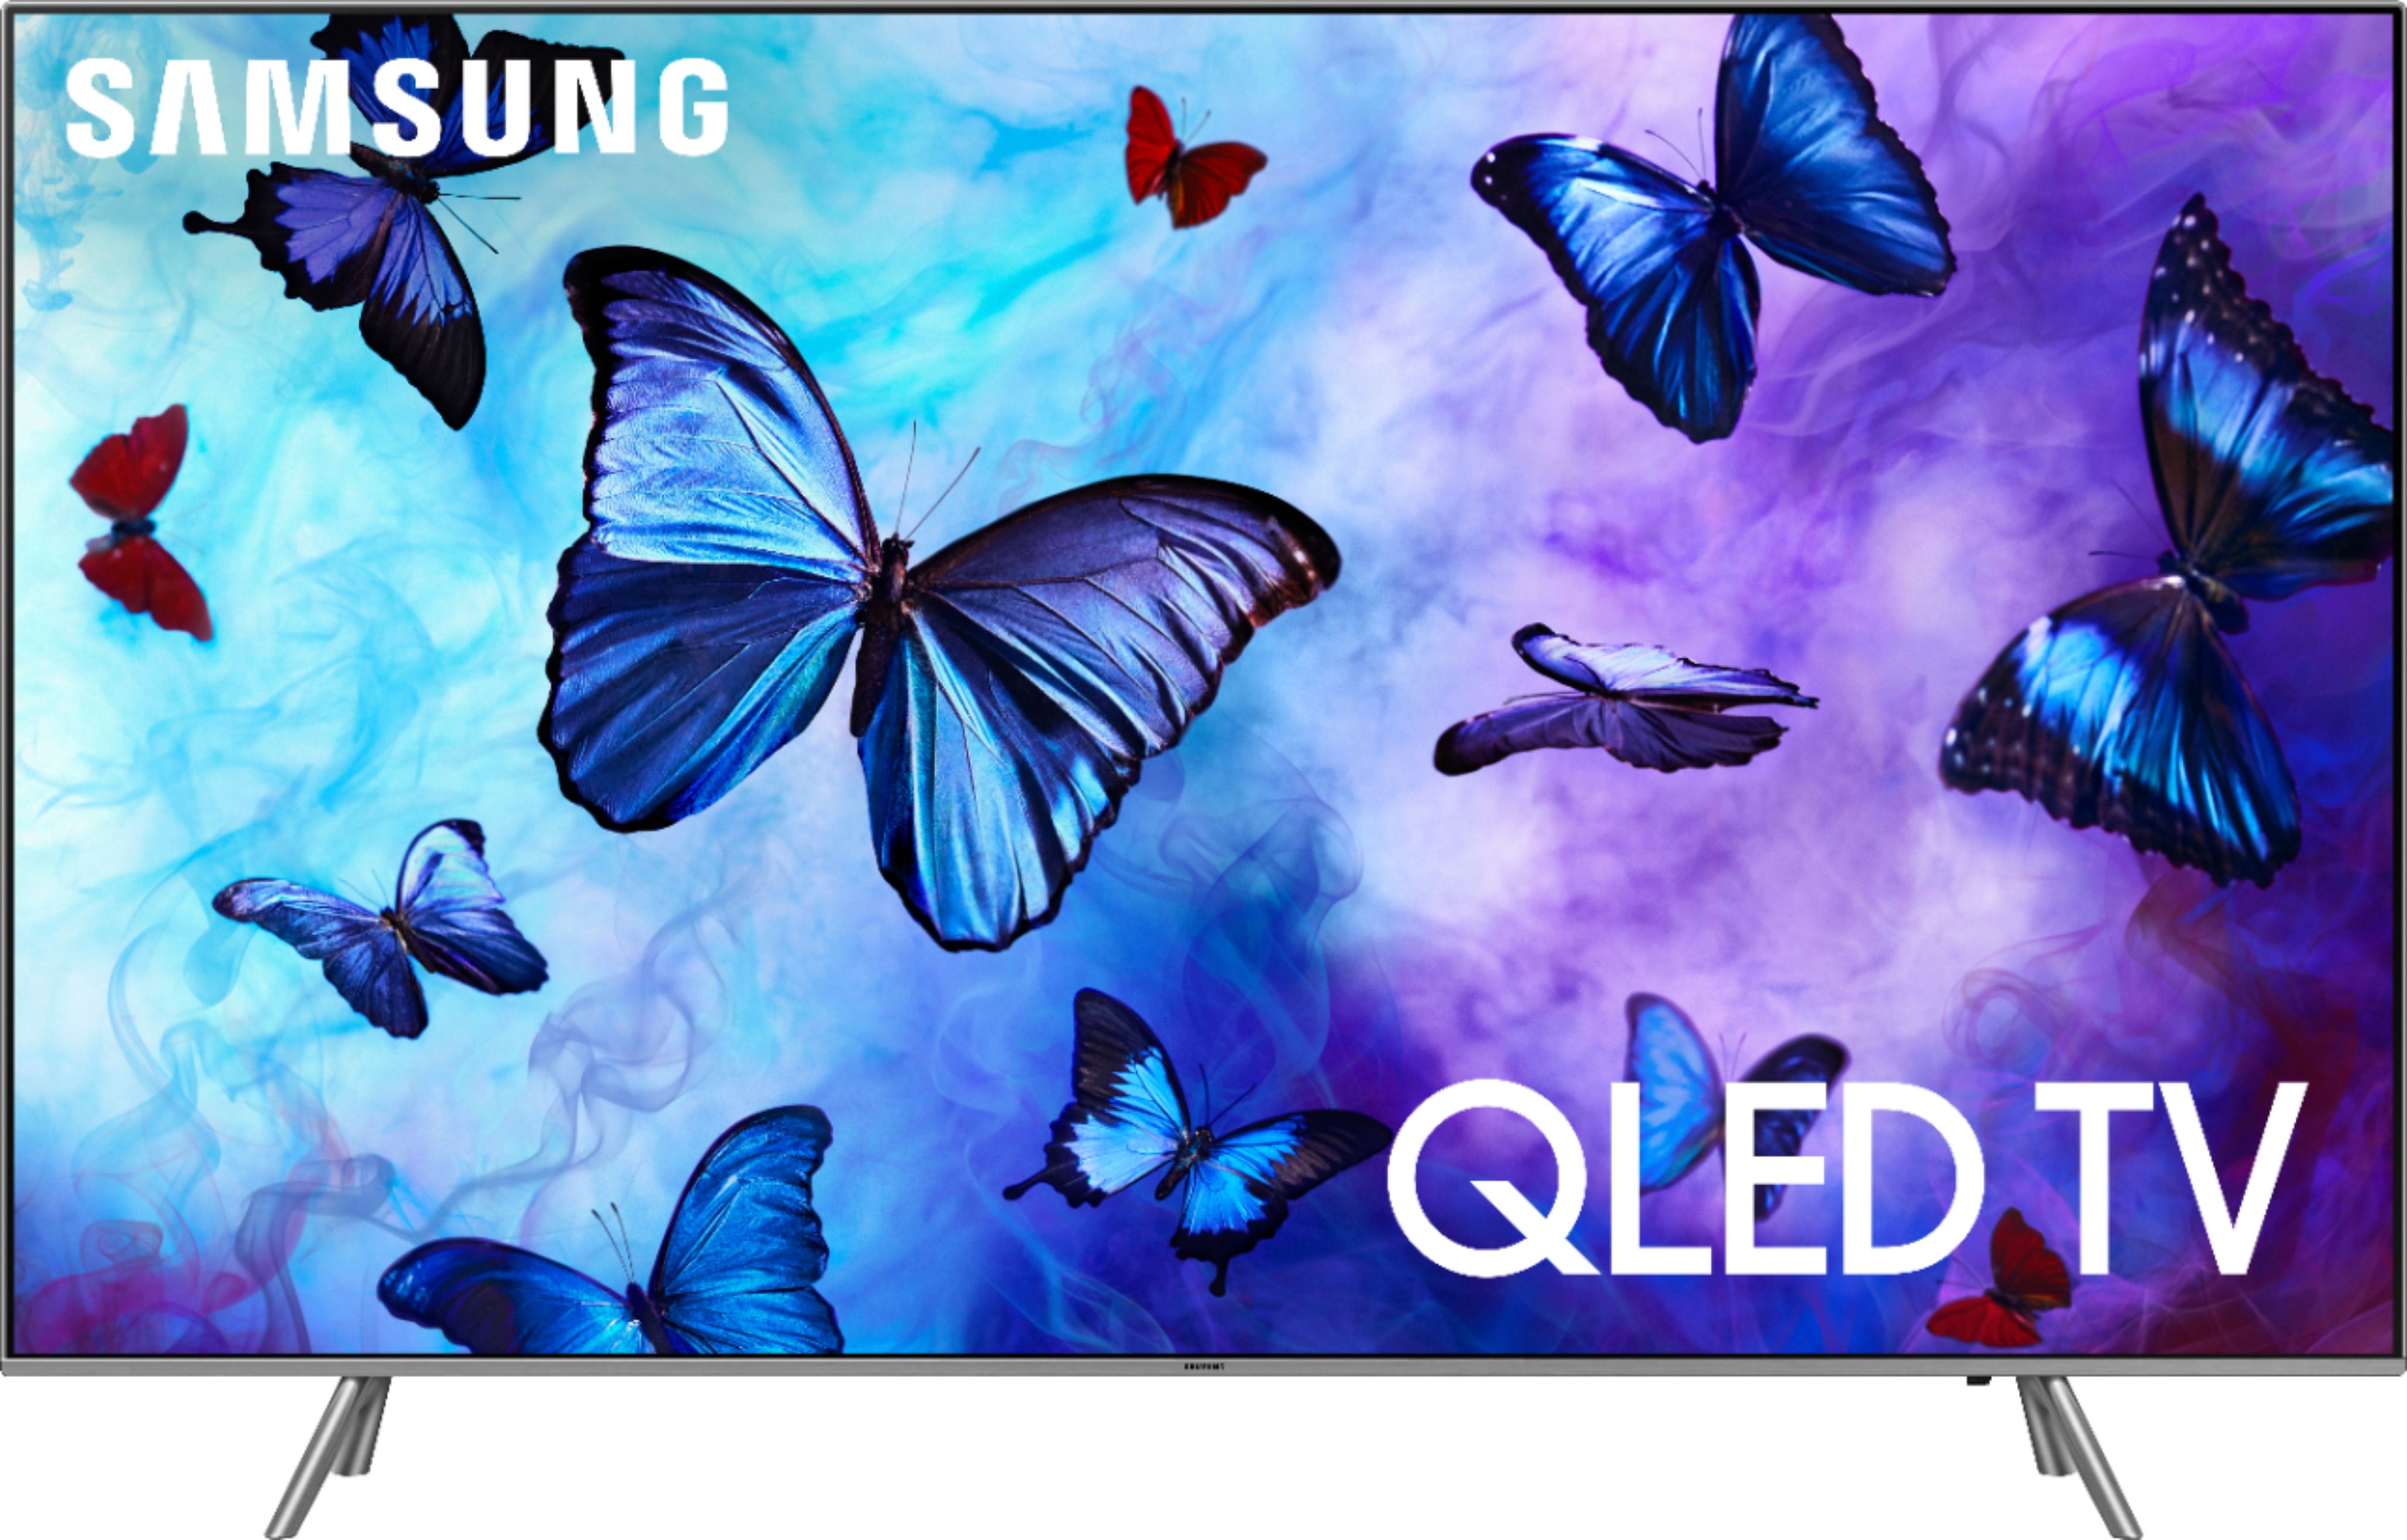 Samsung - 49" Class - LED - Q6F Series - 2160p - Smart - 4K UHD TV with HDR